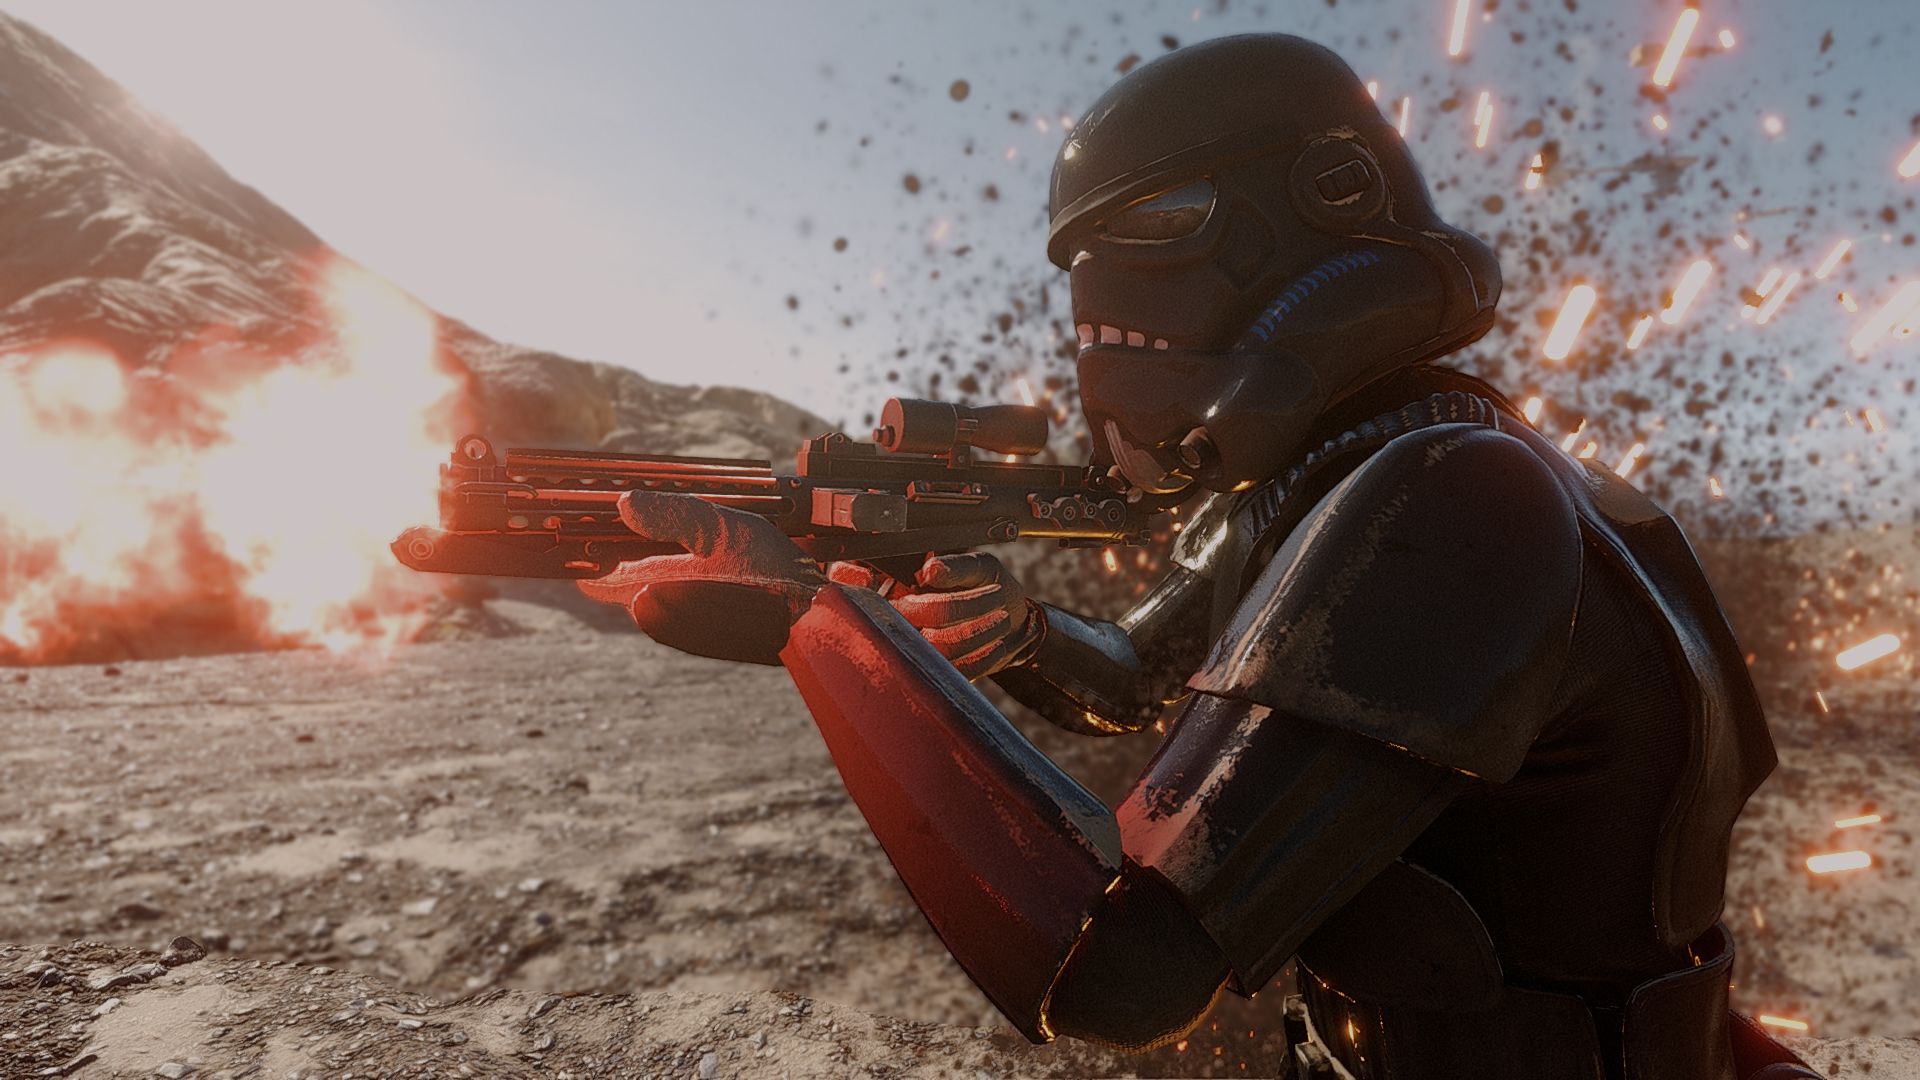 Shadow Trooper in Battle at Star Wars: Battlefront (2015) Nexus and Community